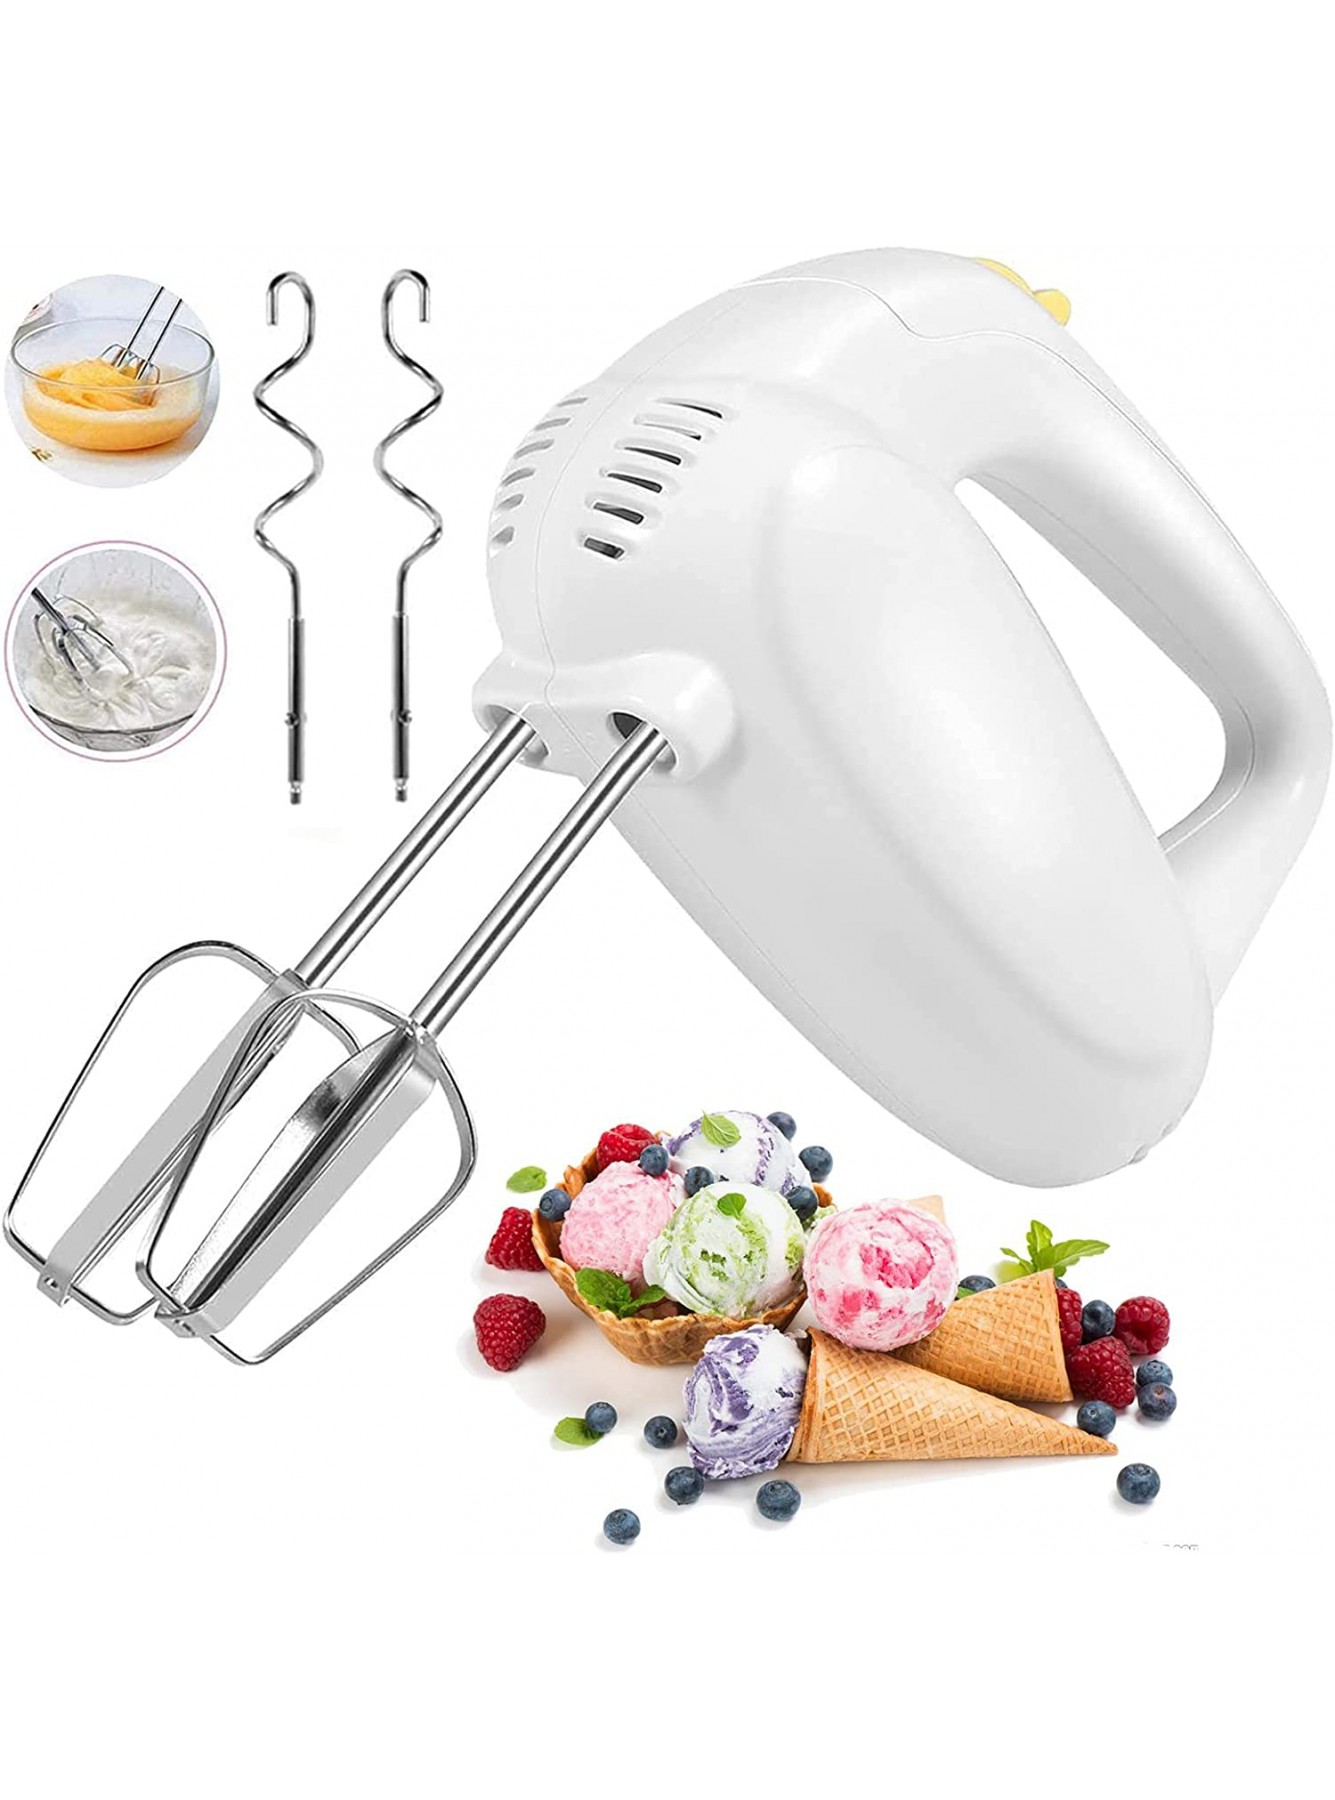 2022 Hand Mixer Electric 5 Speeds Selection Portable Handheld Kitchen Whisk Lightweight Powerful Handheld Electric Mixer Stainless Steel Egg Whisk with 2 Beaters & 2 Dough Hooks for Cake Baking Cooking B09PH2N1G2